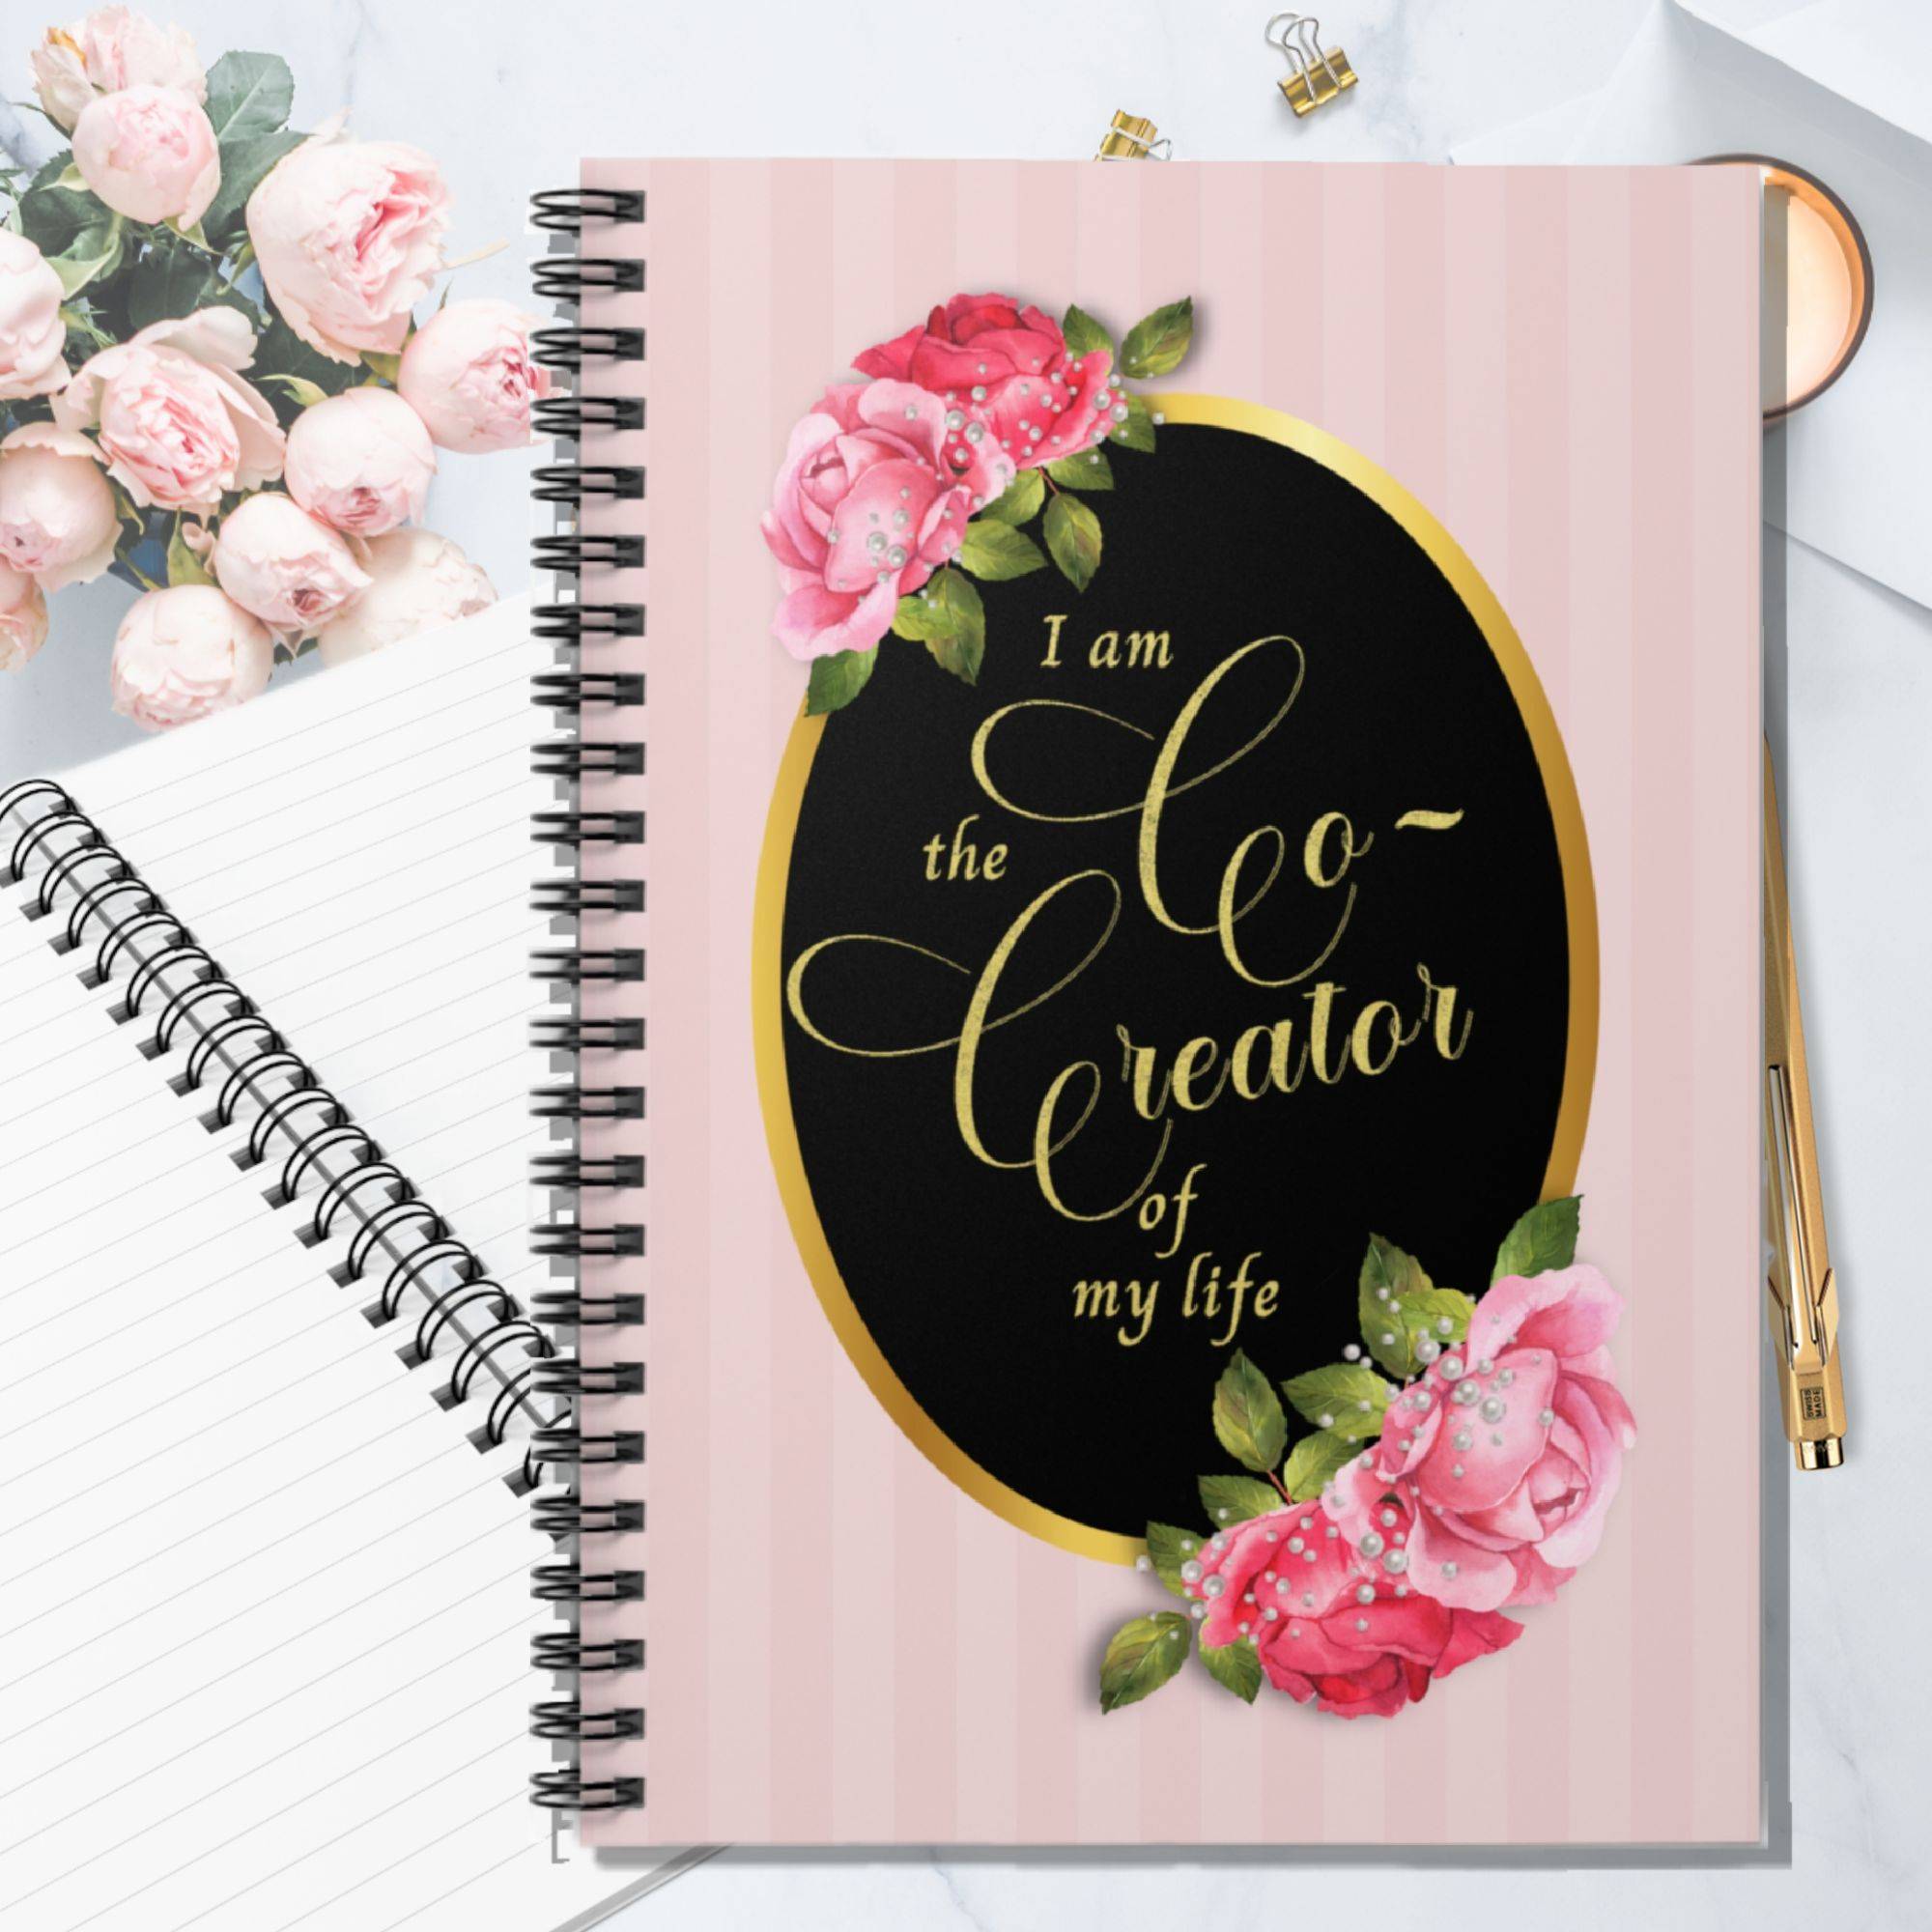 pink striped journal: I am the C-Creator of my Life